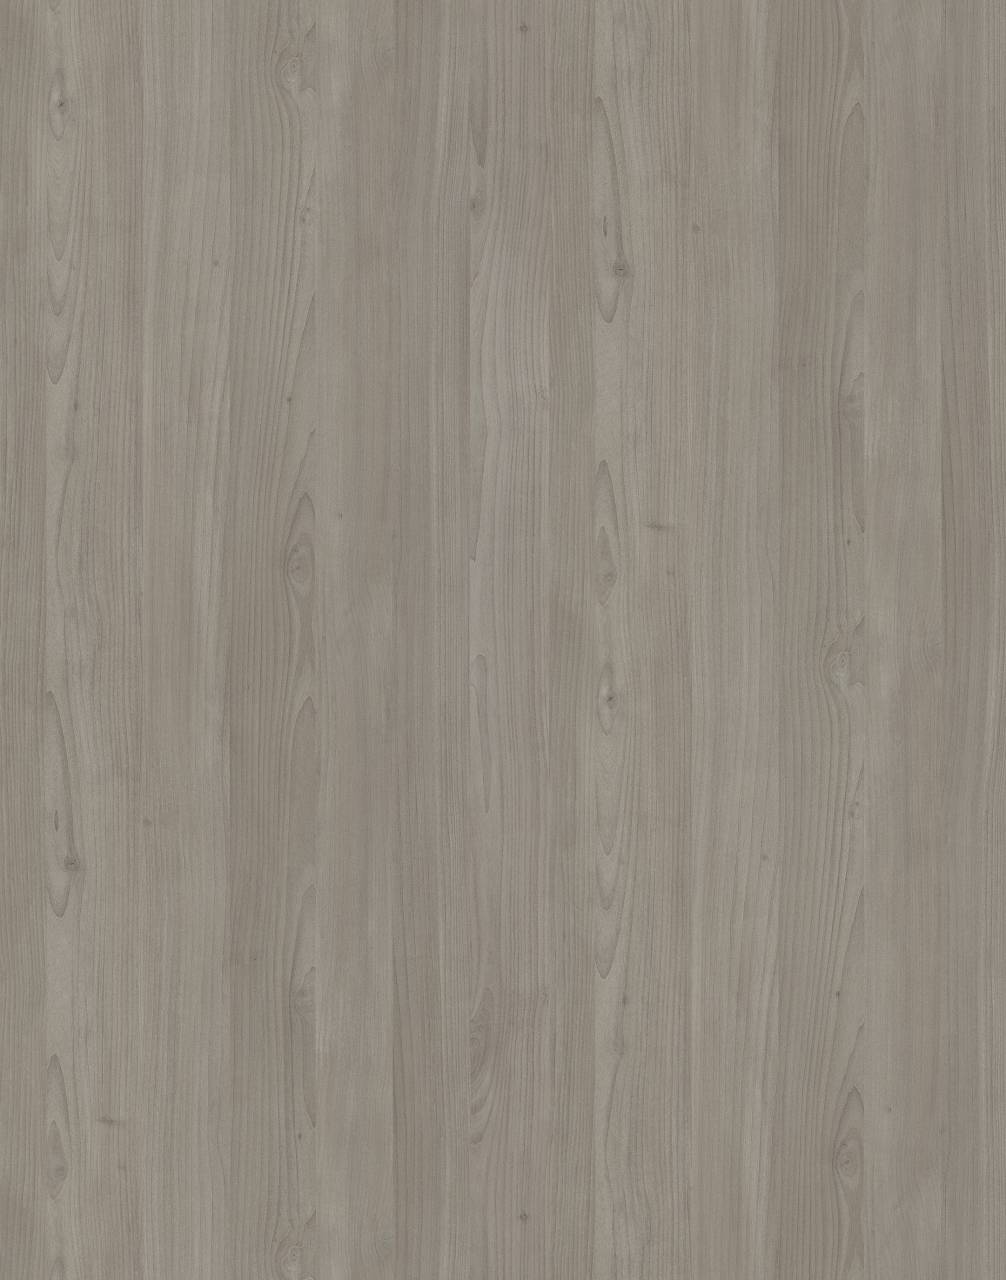 Grey Nordic Wood PW HPL with textured surface and cool grey tones for a modern and Scandinavian look.